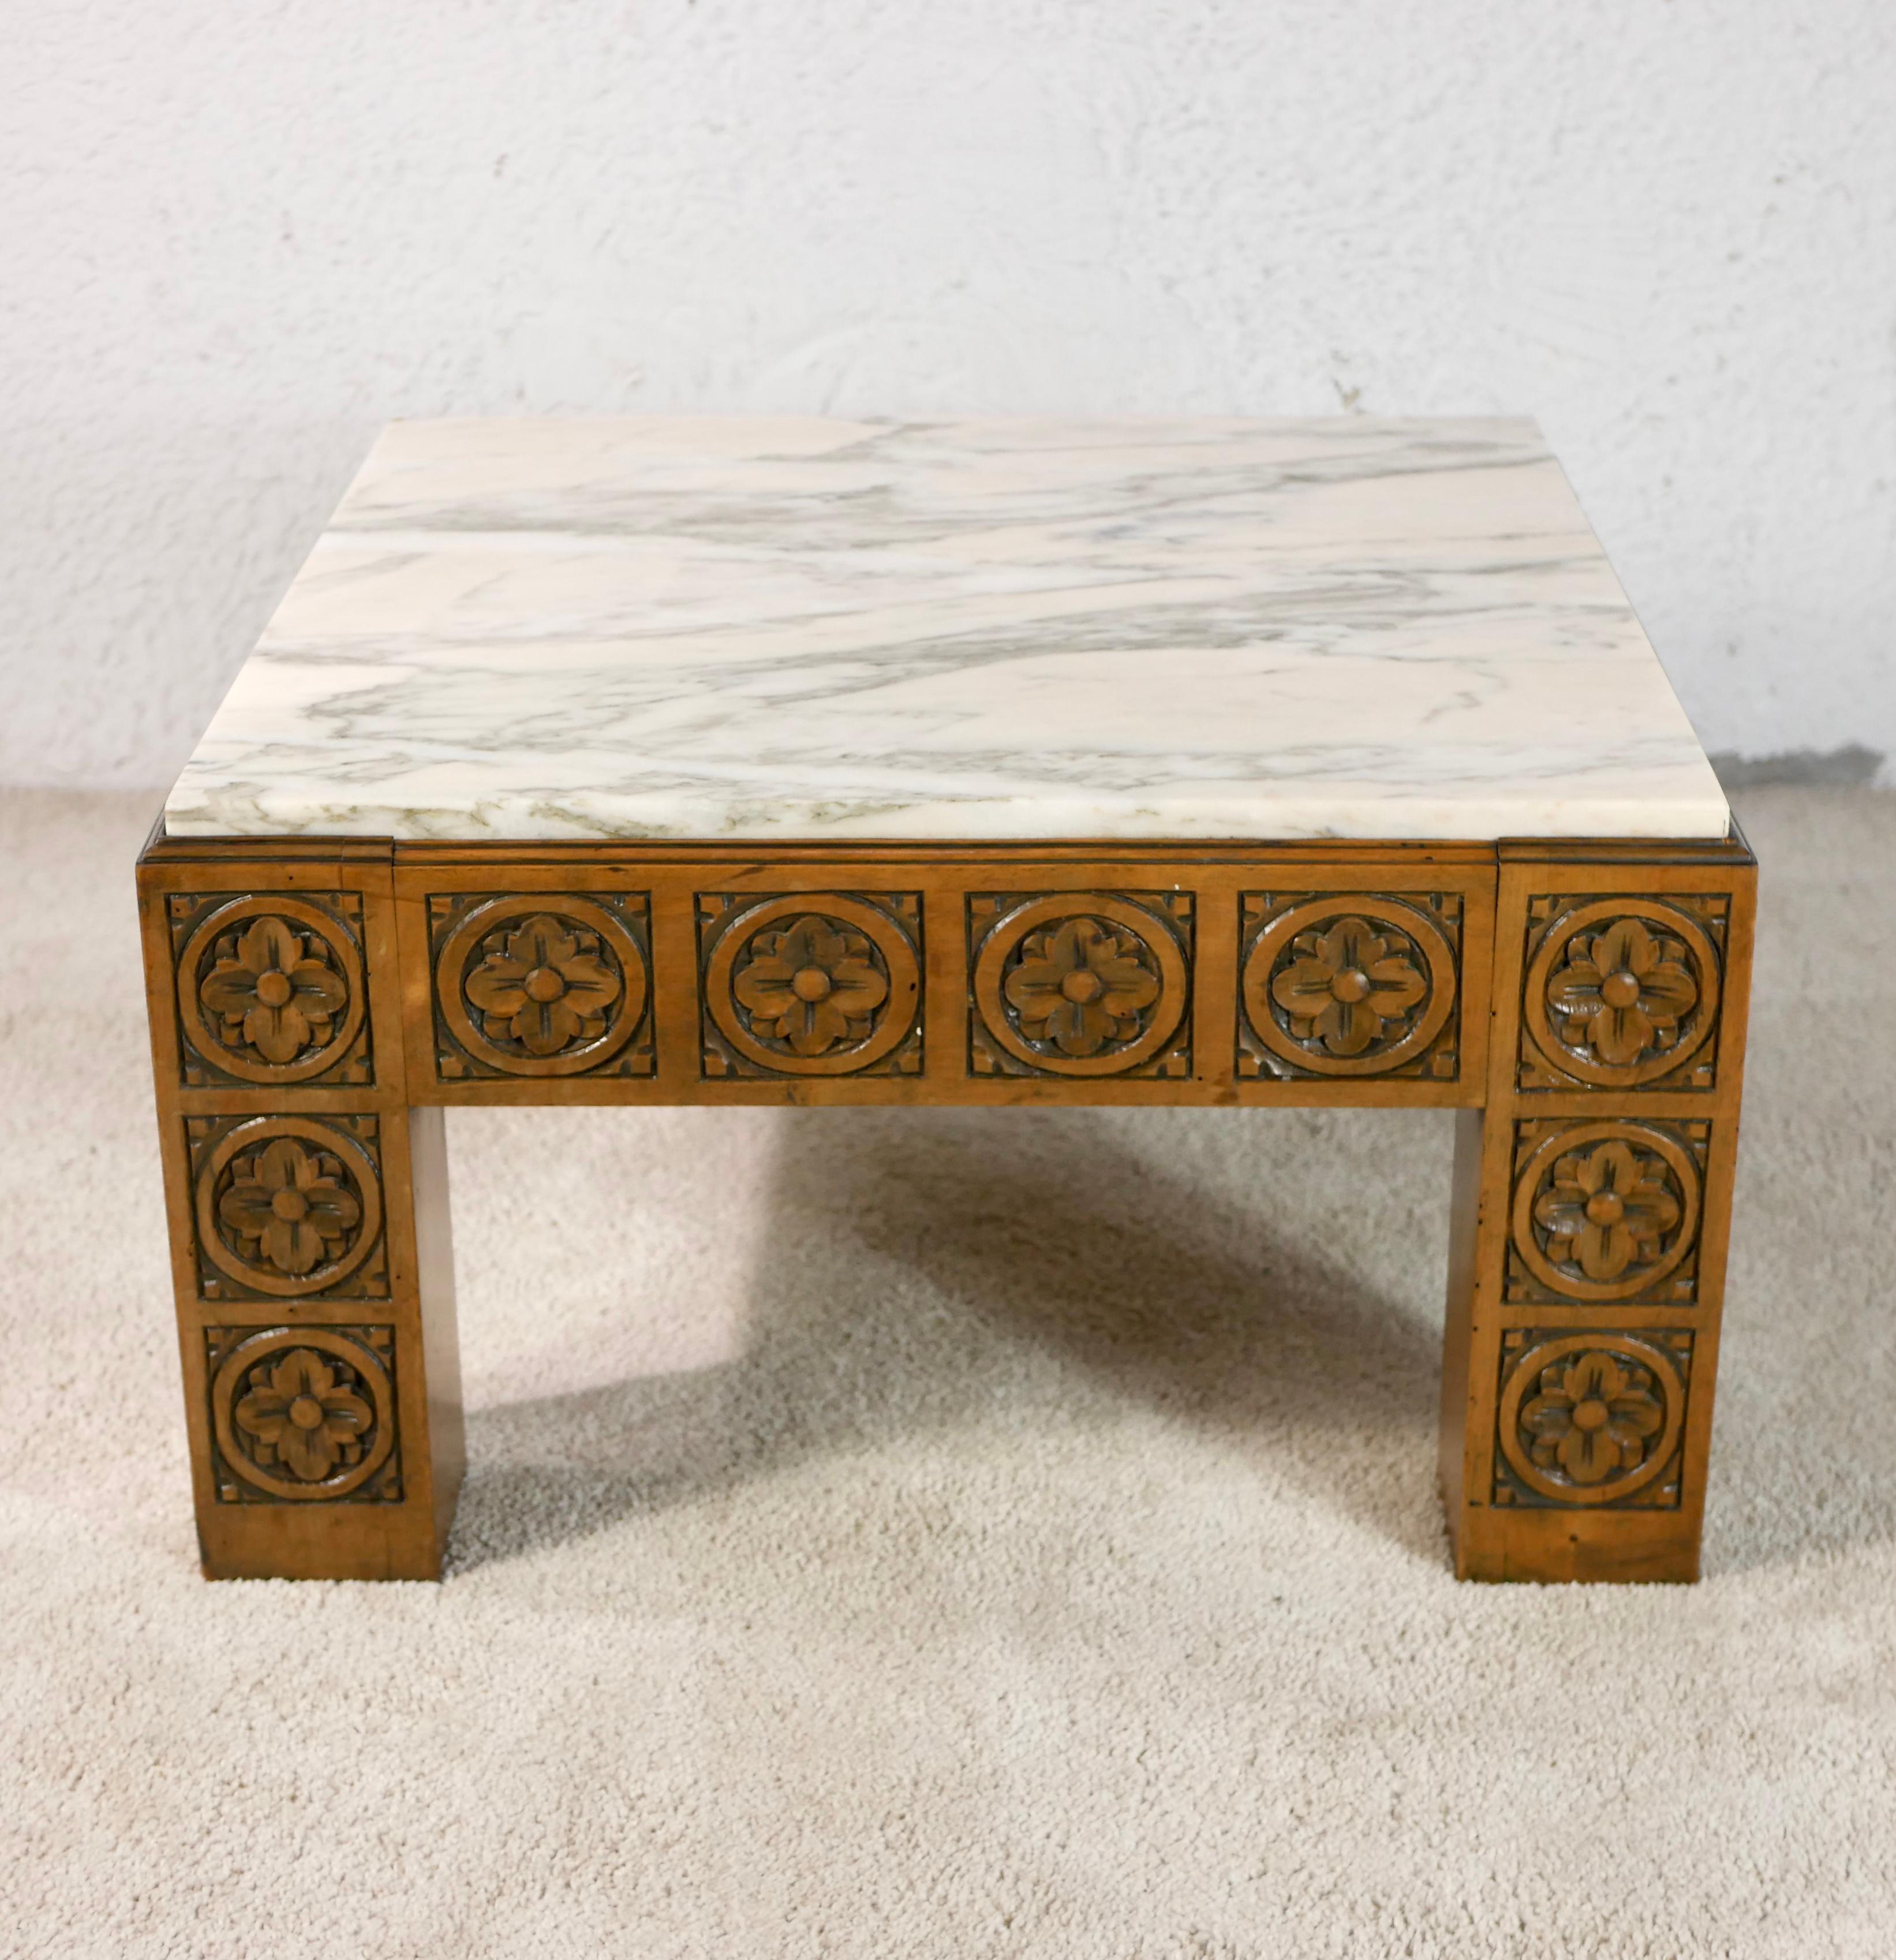 Mid-Century Modern Midcentury Carved Wood and Marble Square Coffee Table from Spain